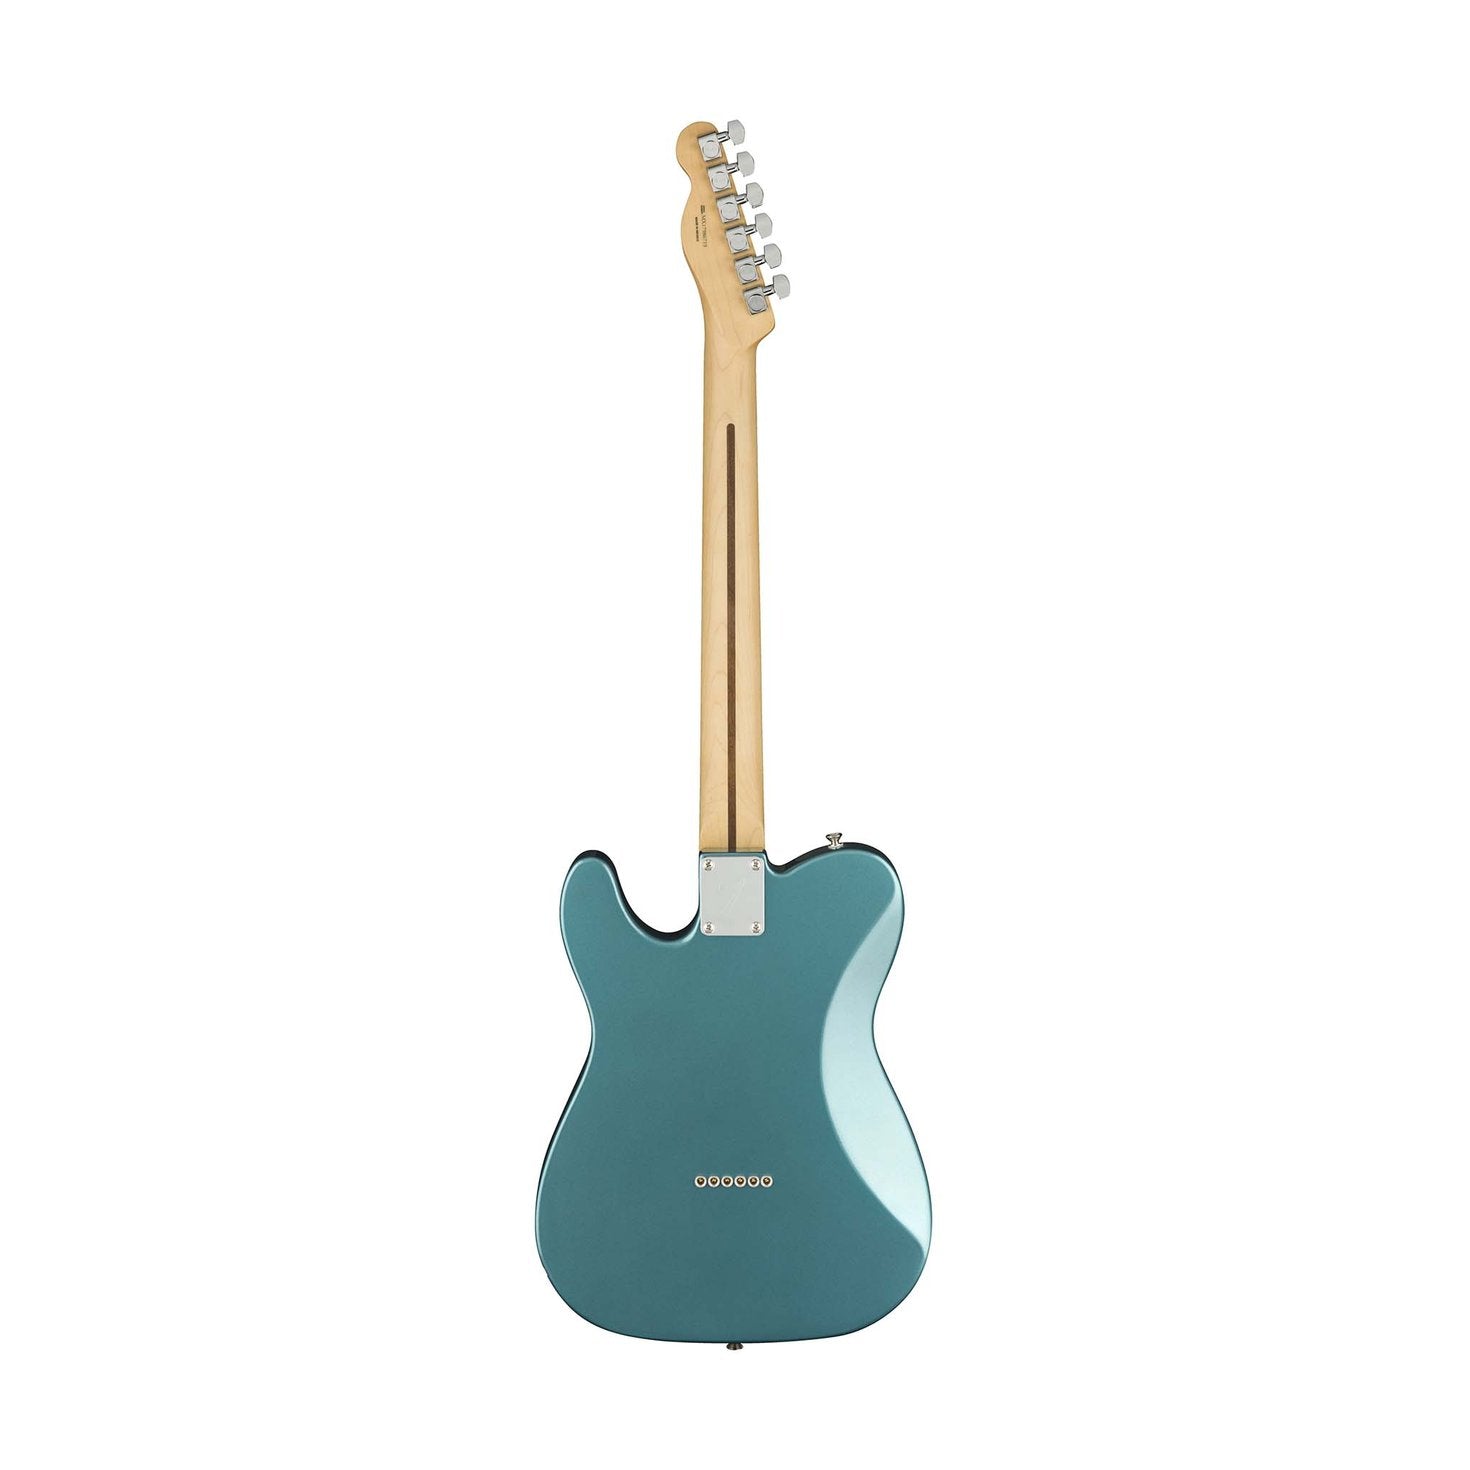 Fender Player HH Telecaster Electric Guitar, Maple FB, Tidepool, FENDER, ELECTRIC GUITAR, fender-eletric-guitar-f03-014-5232-513, ZOSO MUSIC SDN BHD